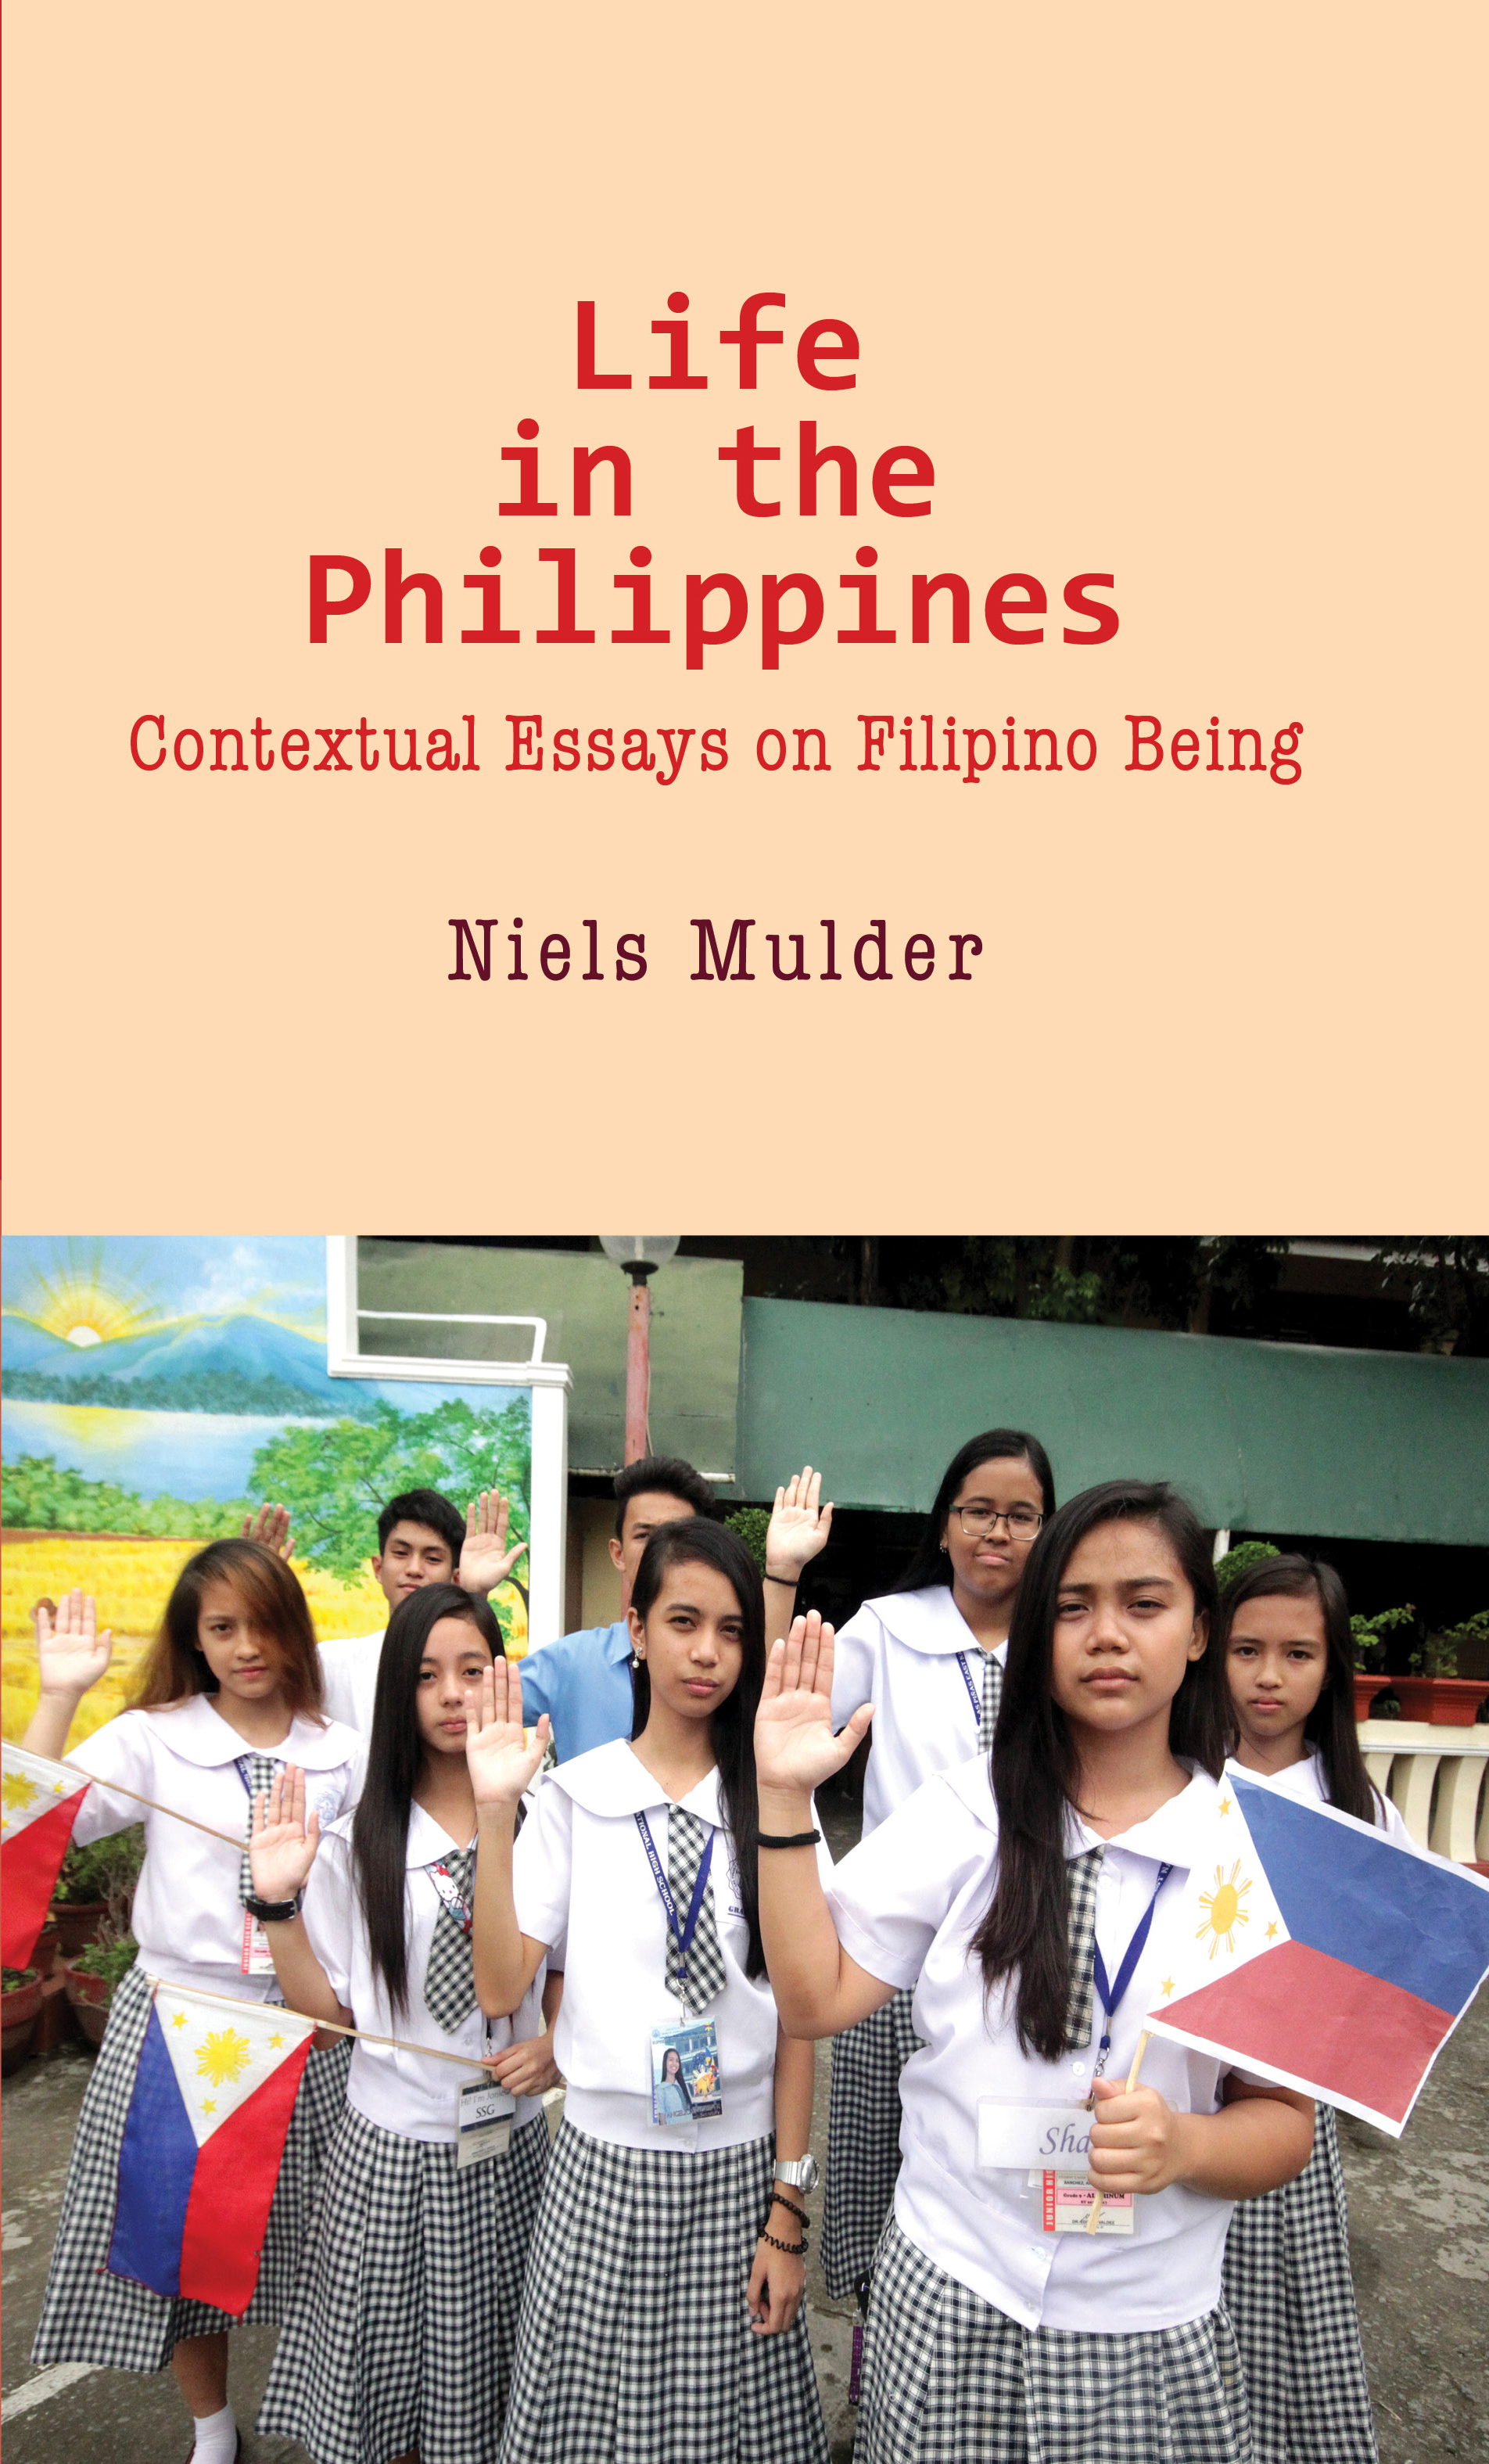 essay about life in the philippines